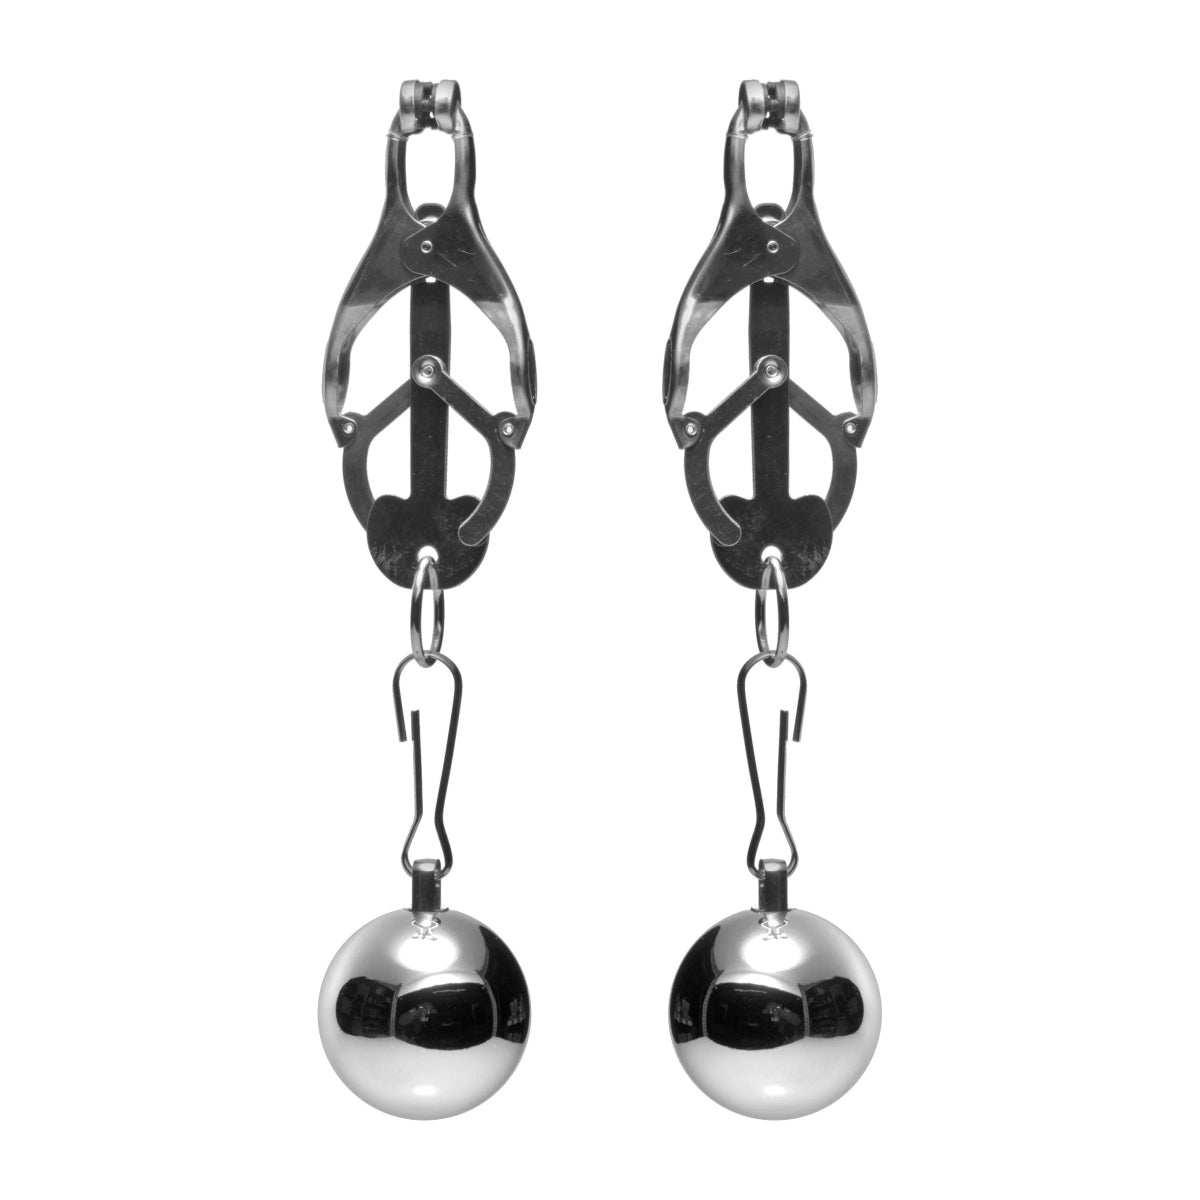 Master Series Deviant Monarch Weighted Nipple Clamps Silver